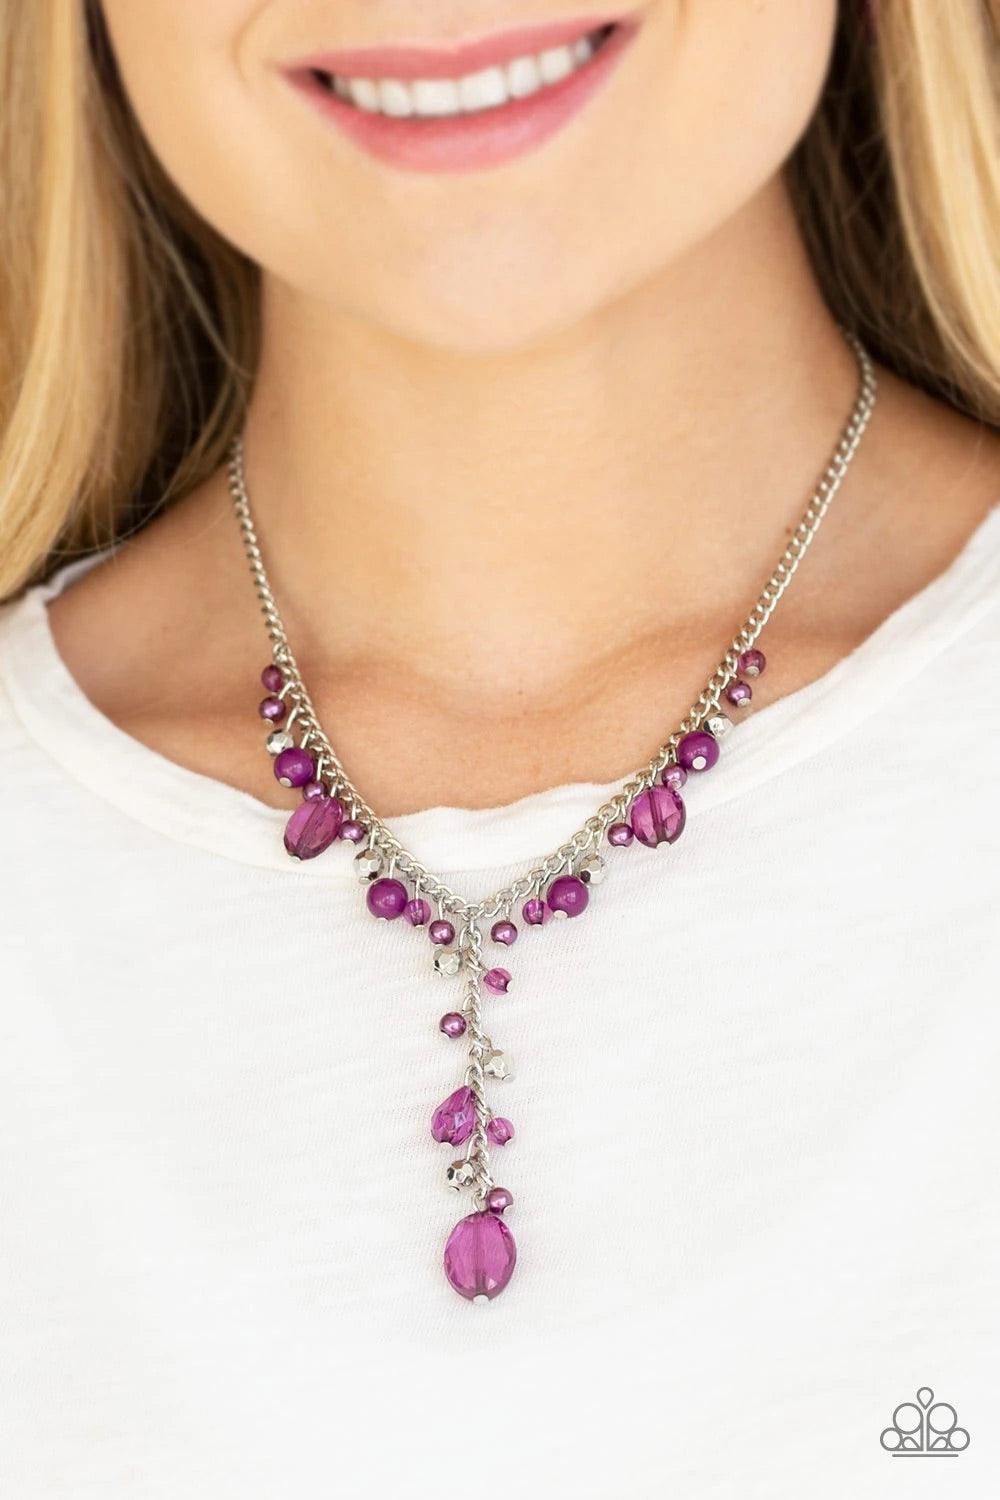 Paparazzi Accessories Crystal Couture - Purple Mismatched polished purple beads, crystal-like beads, and faceted silver beads dance along a shimmery silver chain. Matching beading trickles along a single silver chain, creating a romantic extended pendant